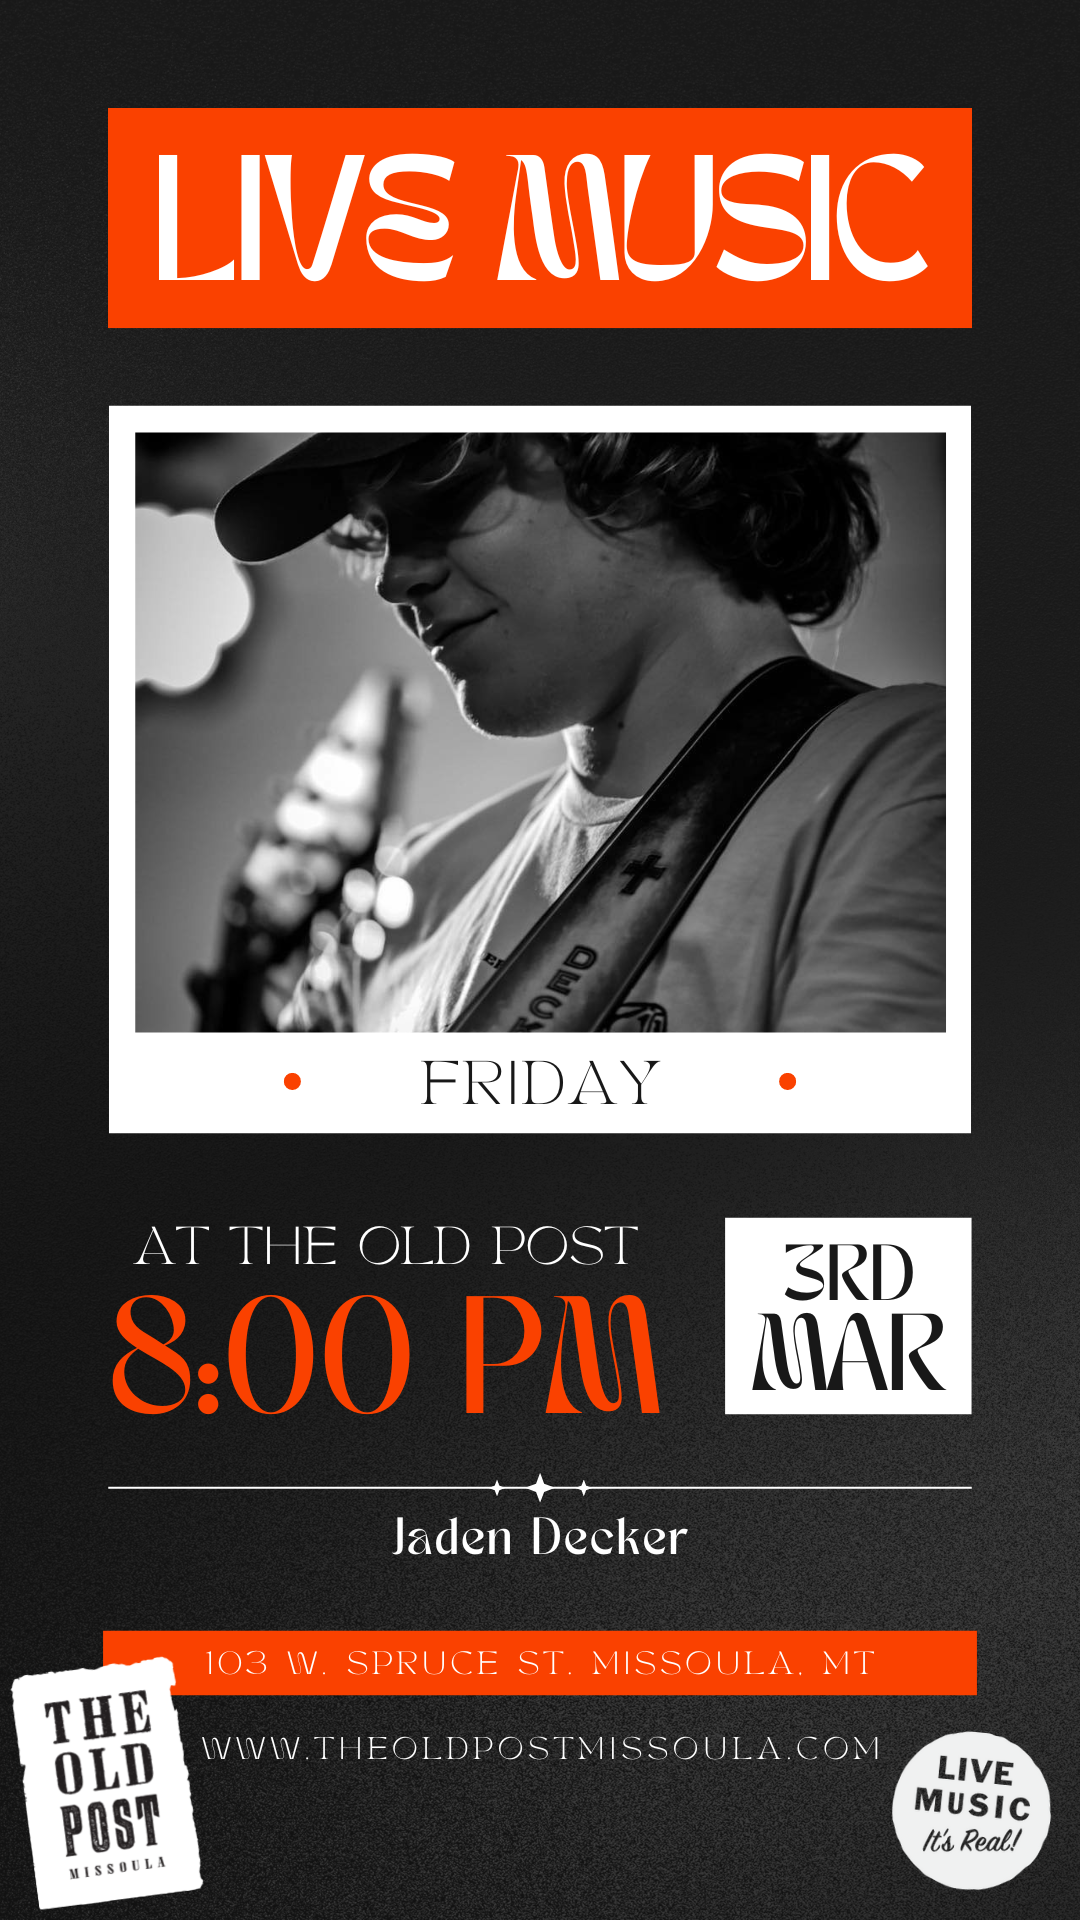 Jaden Decker live at The Old Post in Downtown Missoula from 8:00 pm to 10:00 pm on Thursday, March 3